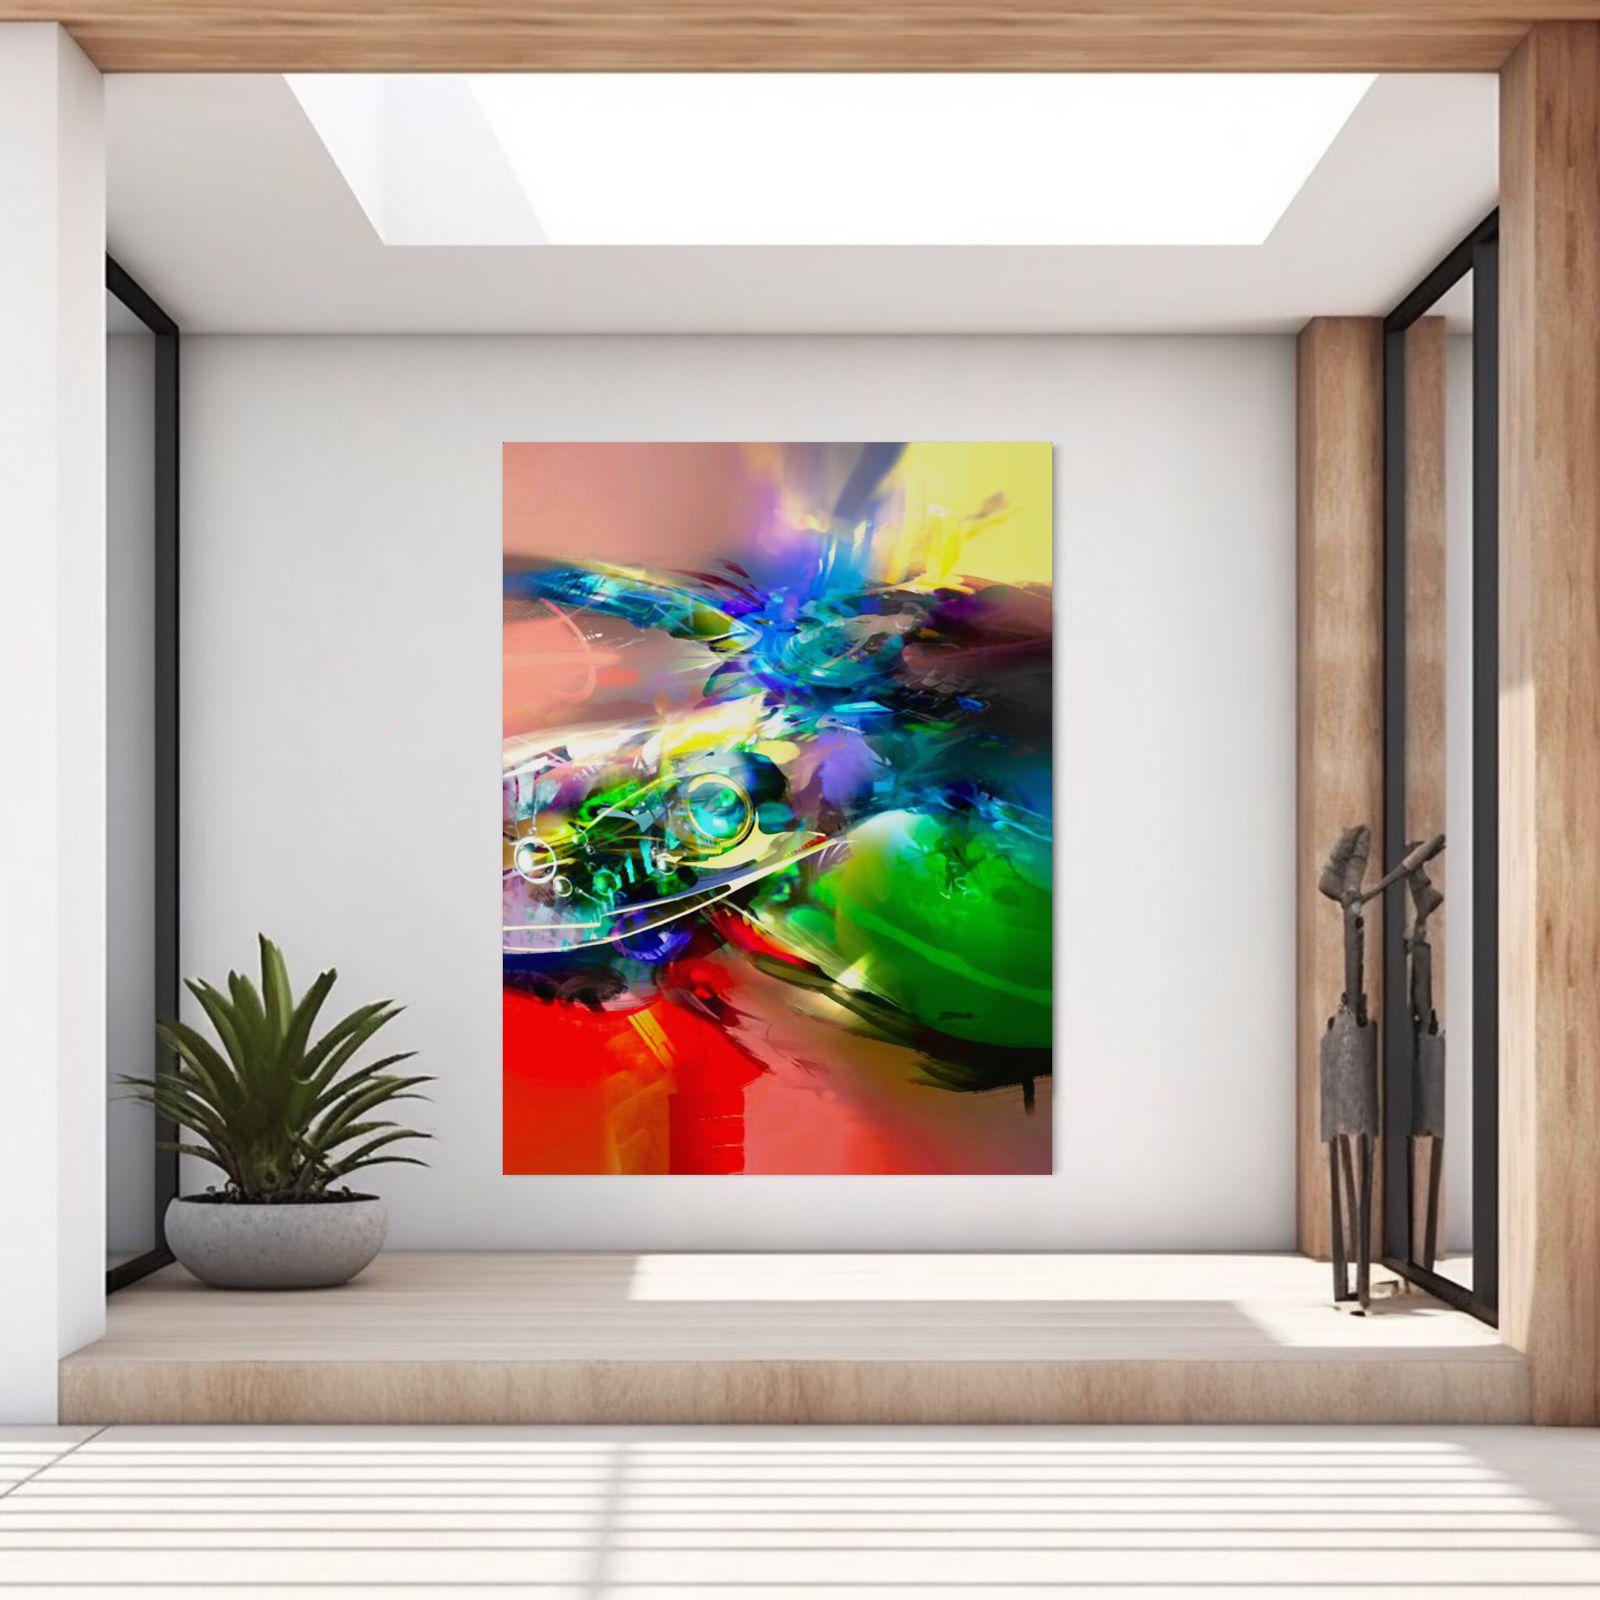 Espitia Fine Art - Acrylic Painting - Abstract Painting - MANDRAGORA - 59in x 79in | 150cm x 200cm - 2